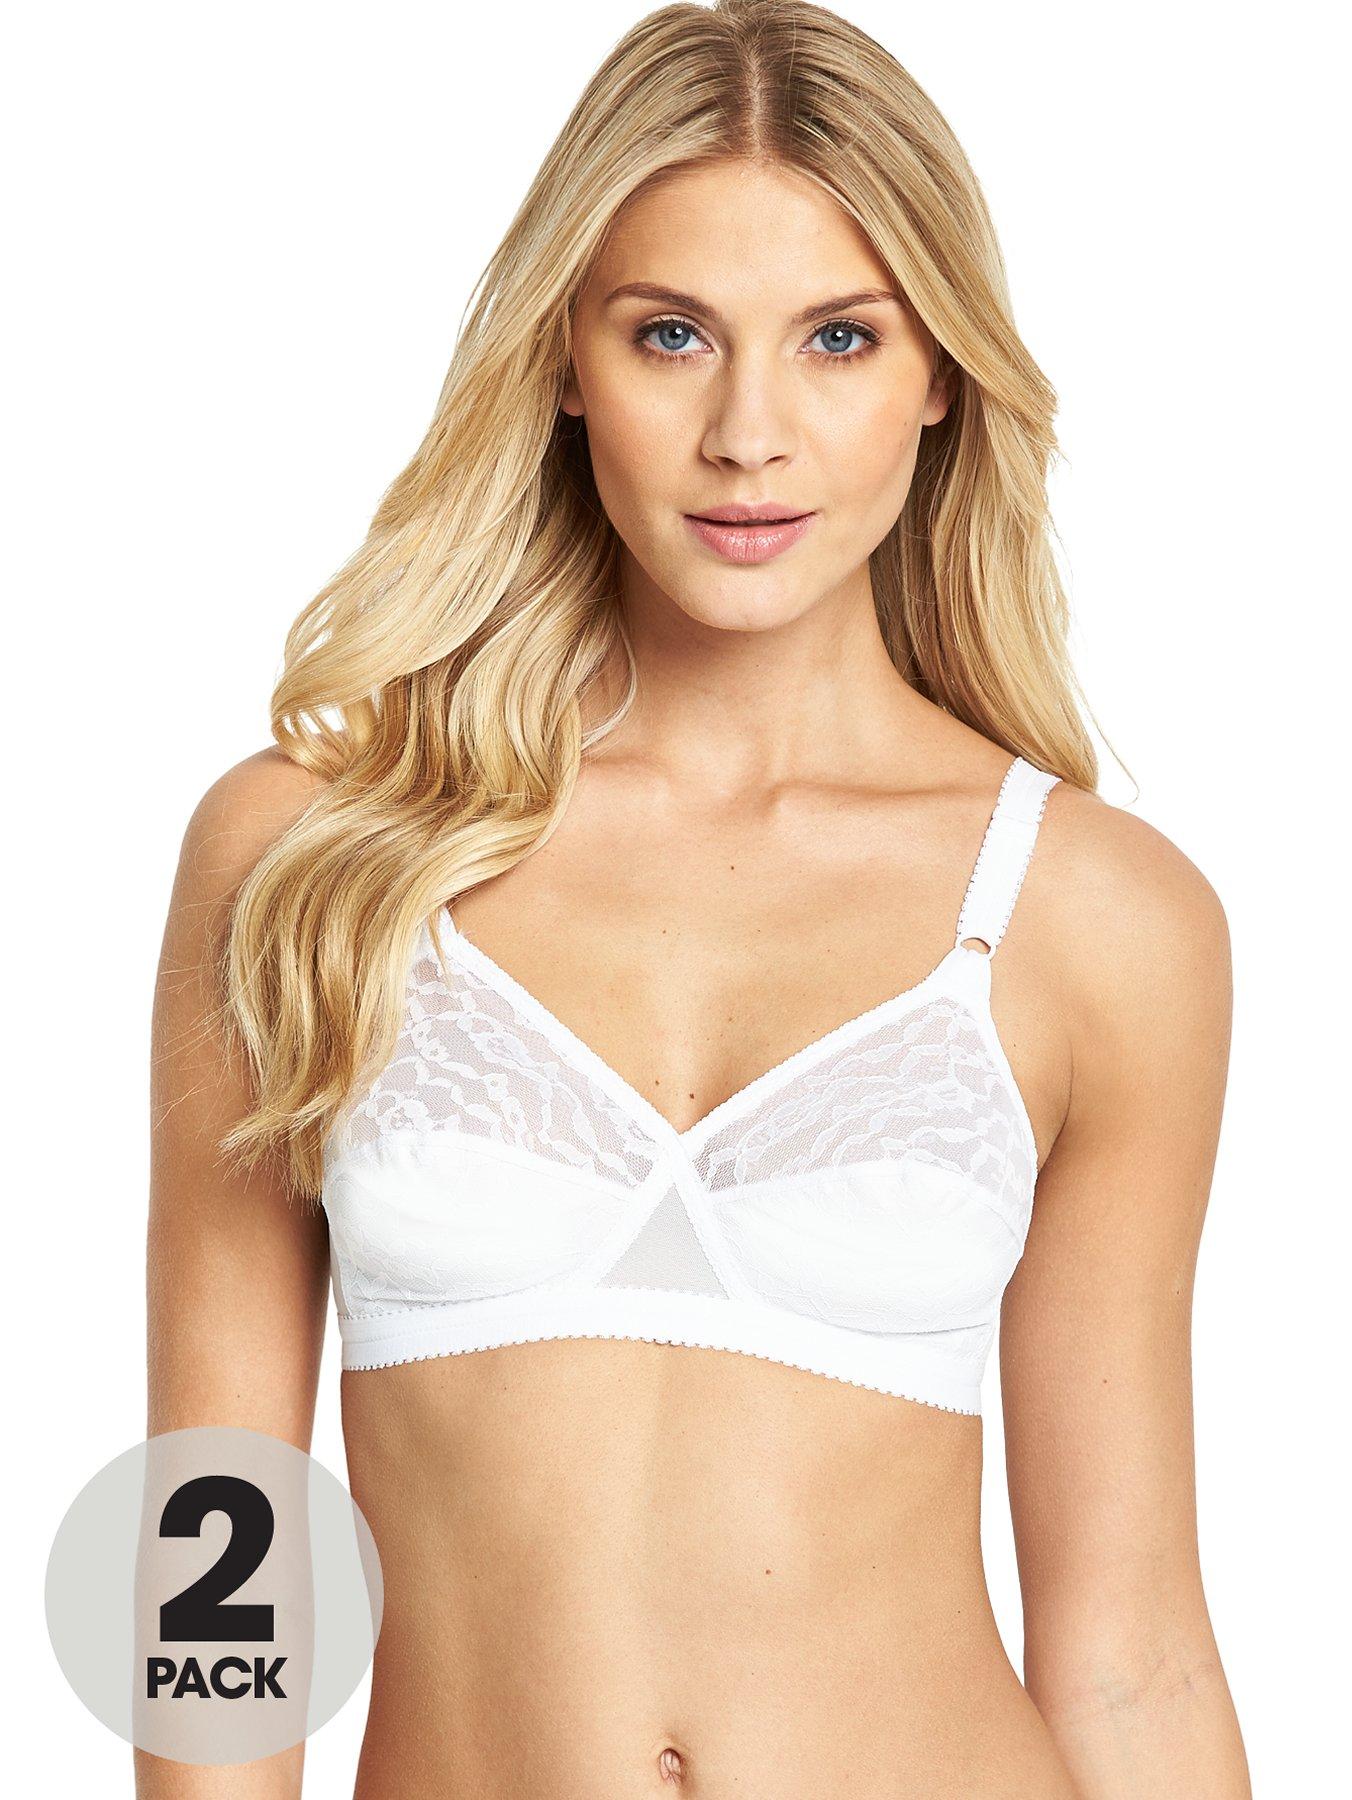 Cross Your Heart Bra Lace 2 Pack - Assorted